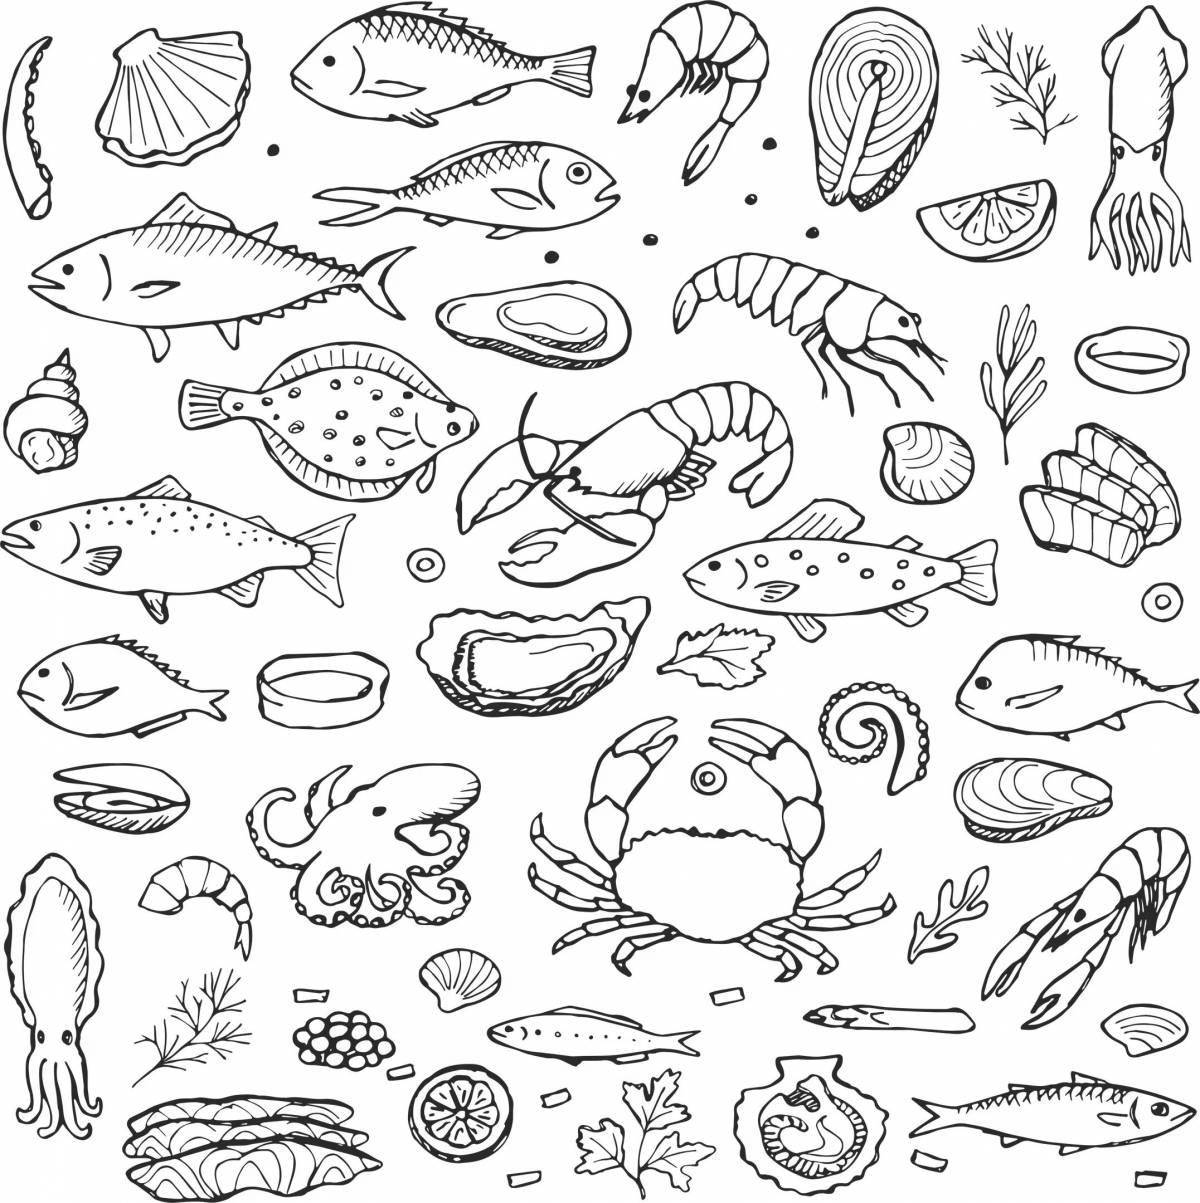 Fun coloring fish products for preschoolers